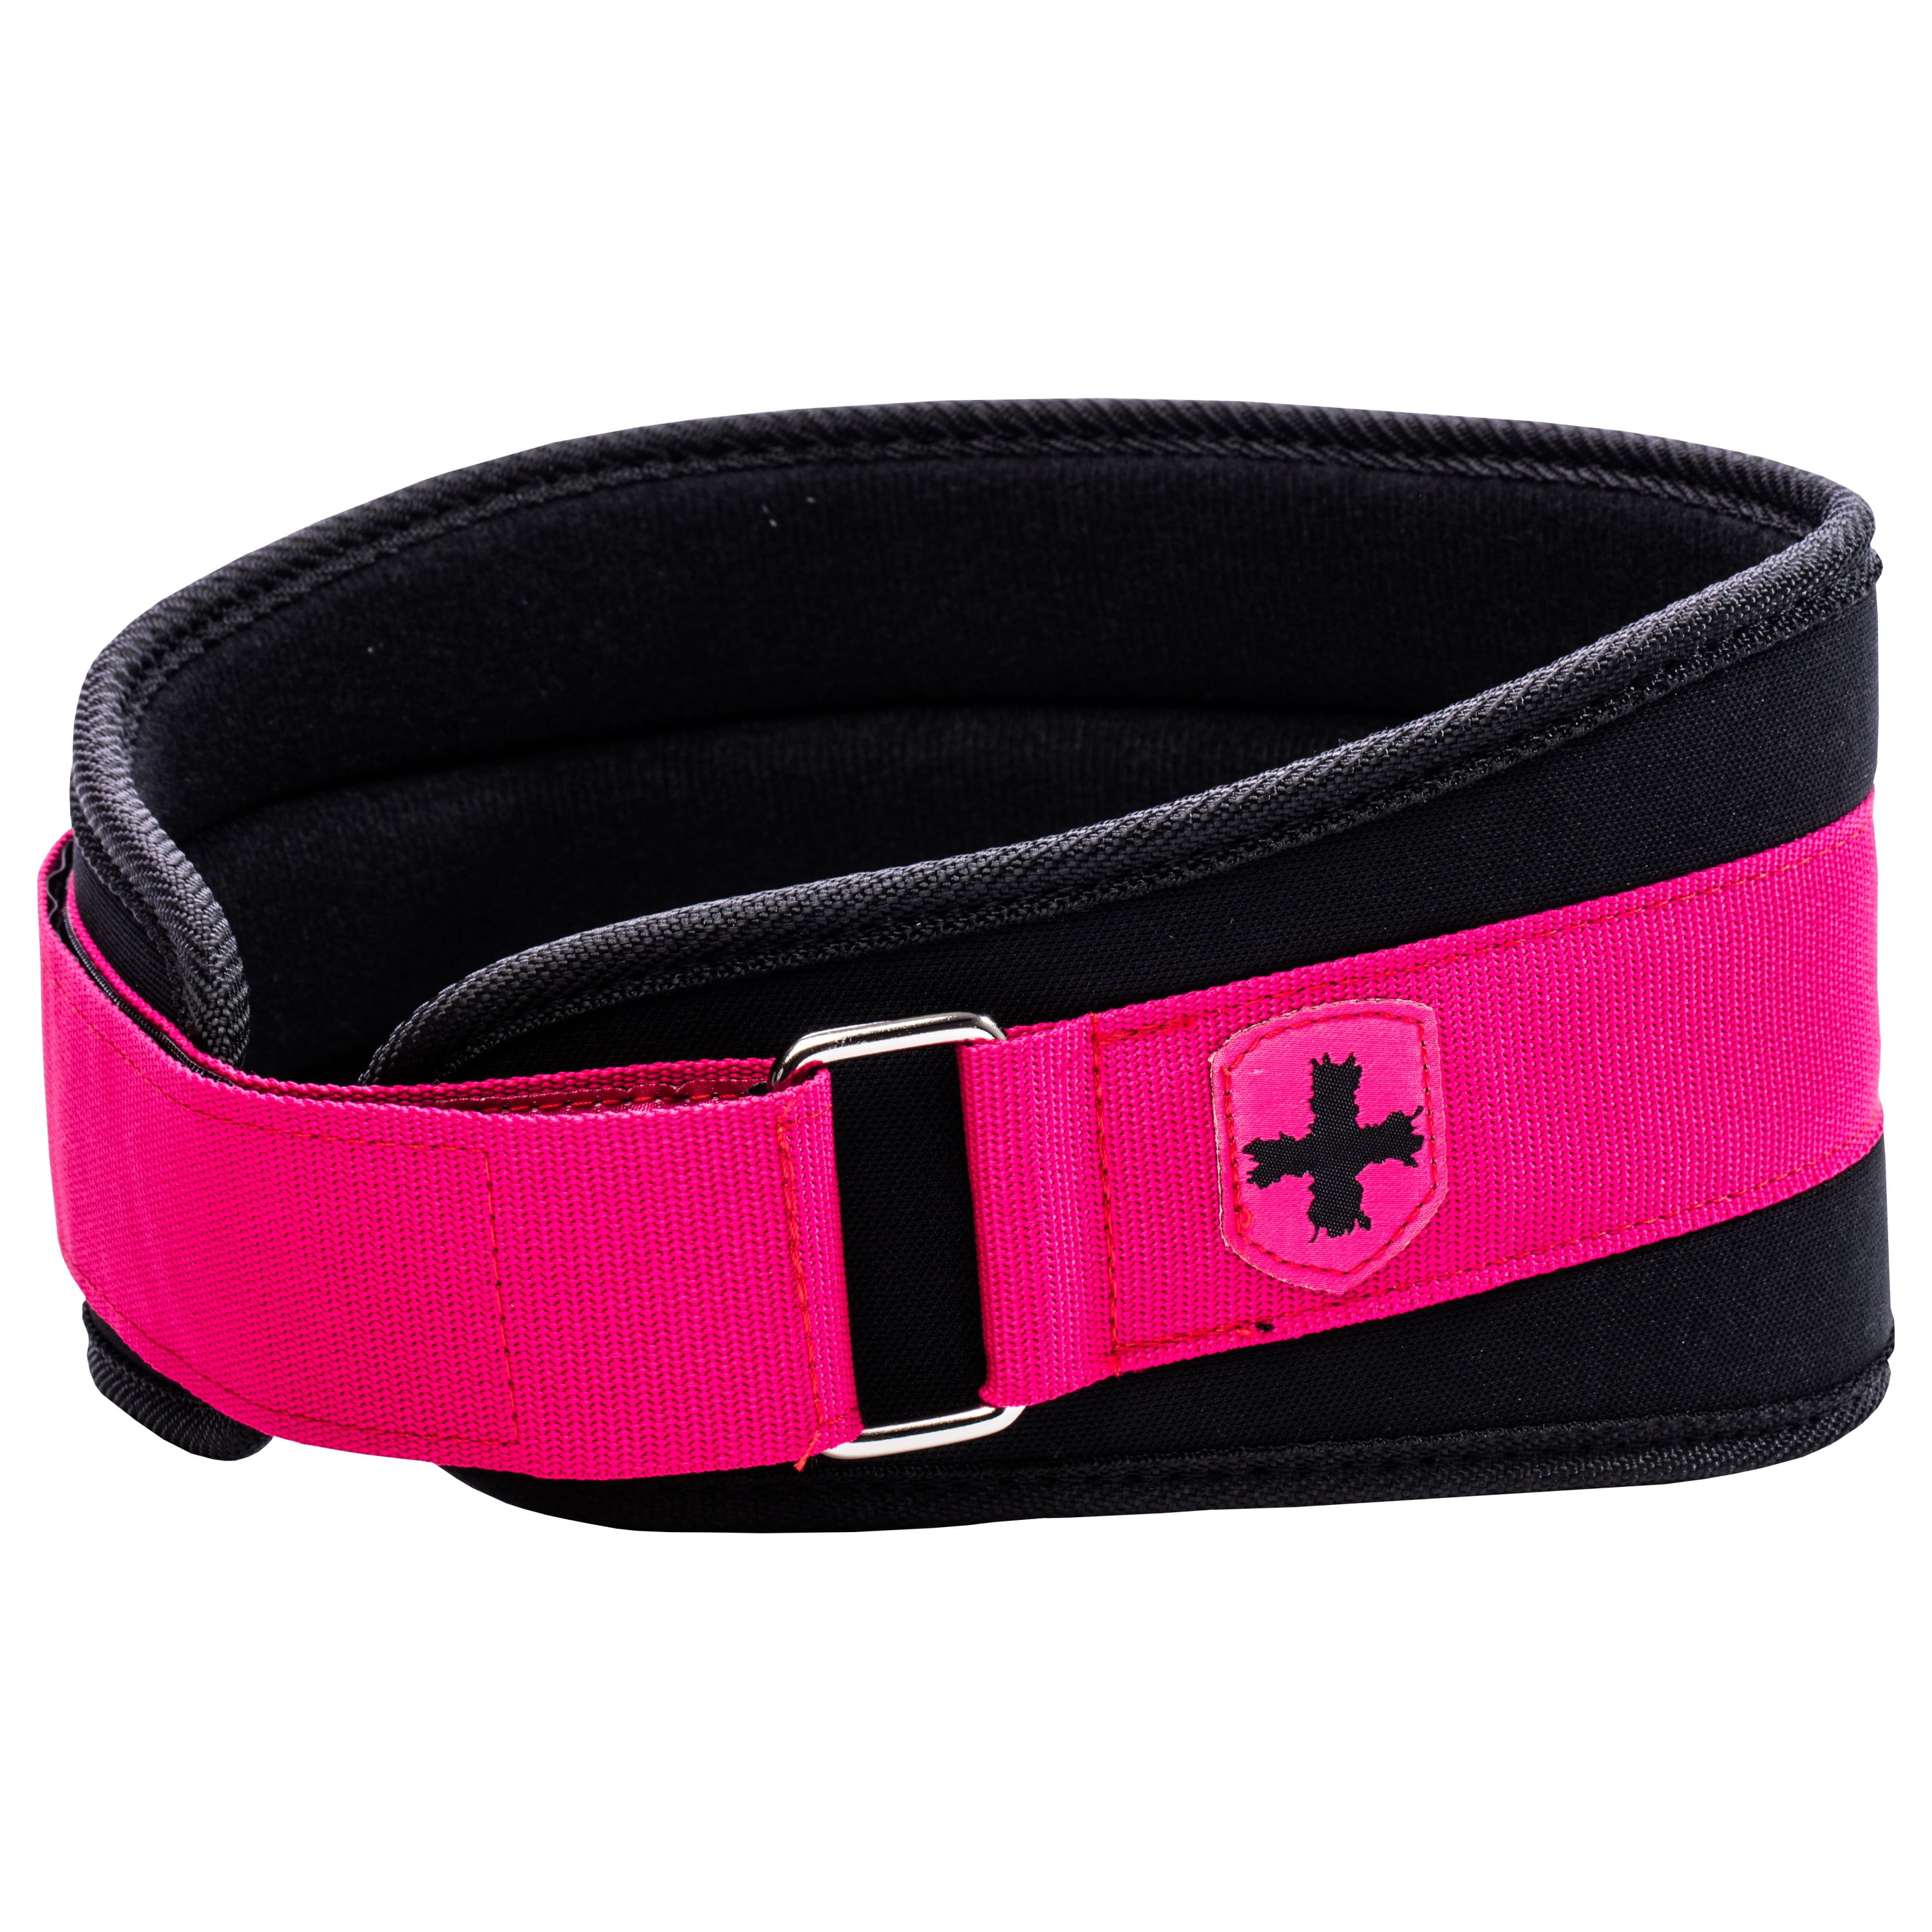 Contraband Pink Label 4047 Womens 5in Foam Padded Weight Lifting Belt